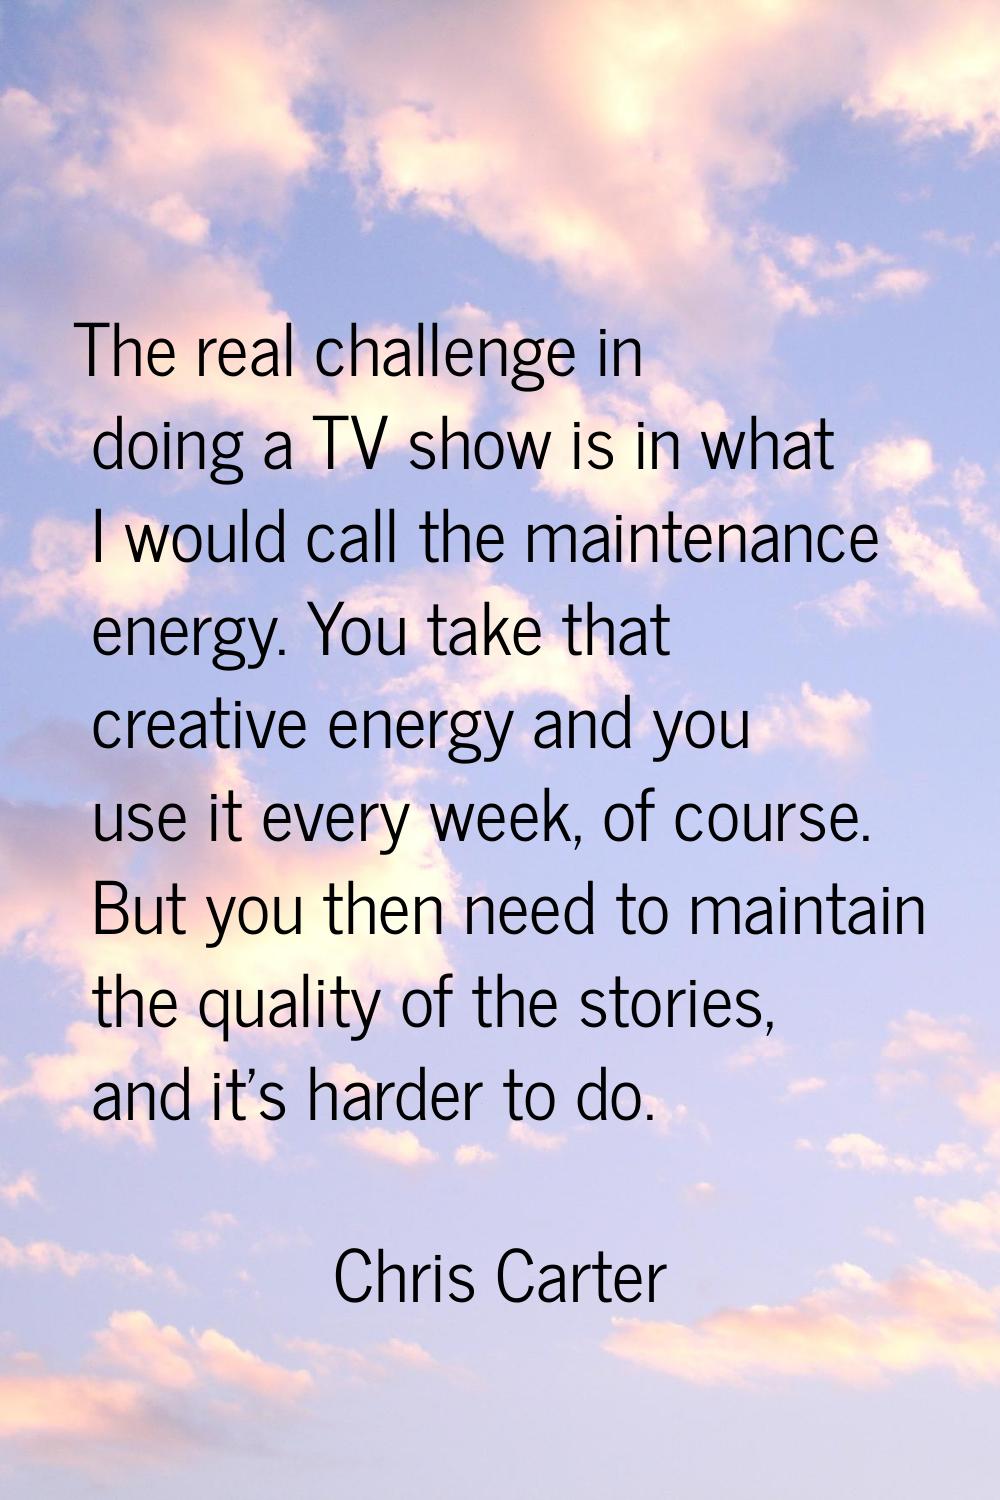 The real challenge in doing a TV show is in what I would call the maintenance energy. You take that